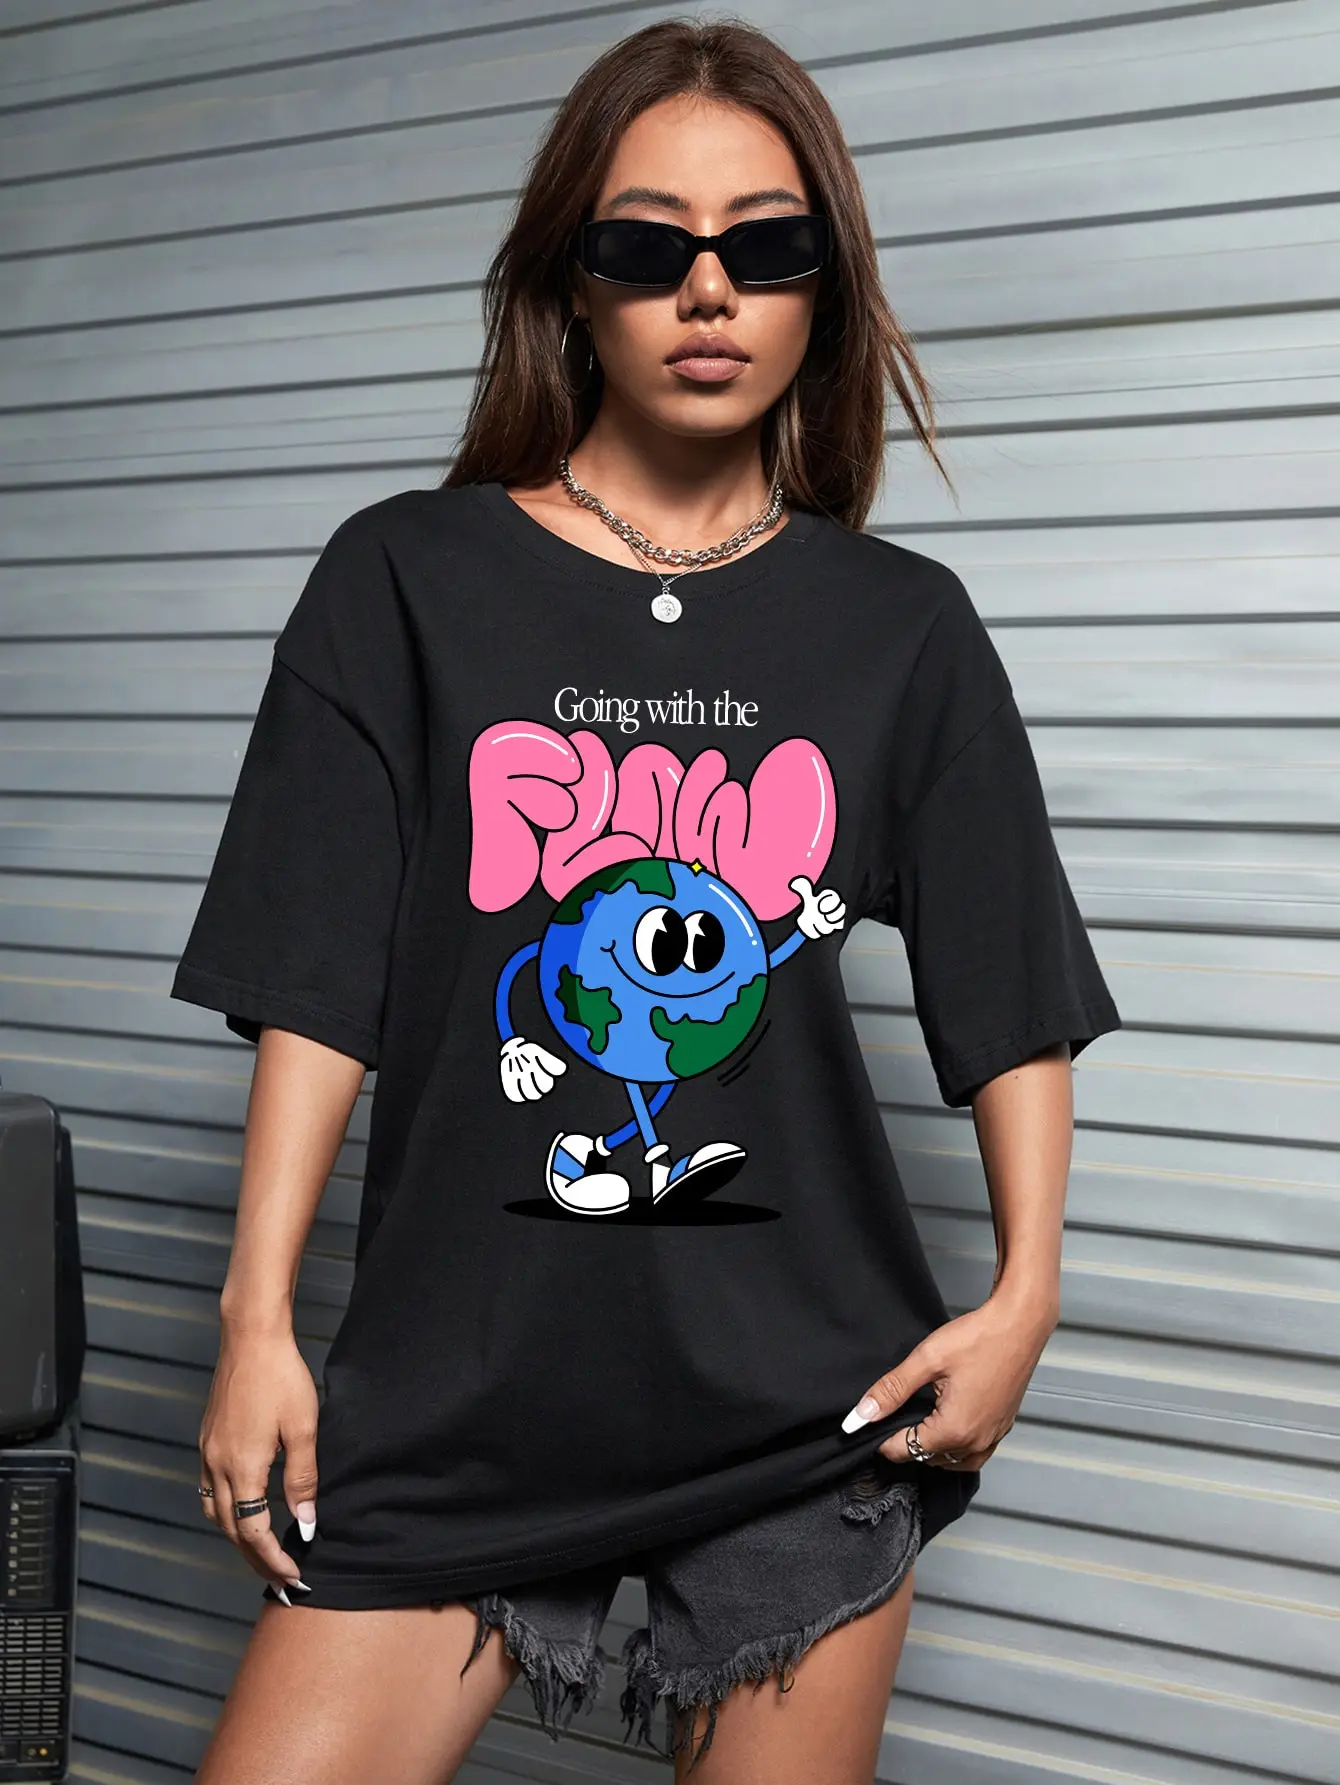 

Going With The Earth Cartoon & Slogan Graphic T-Shirt Women Summer Breathable Short Sleeve 100% Cotton Oversized T-Shirts Female